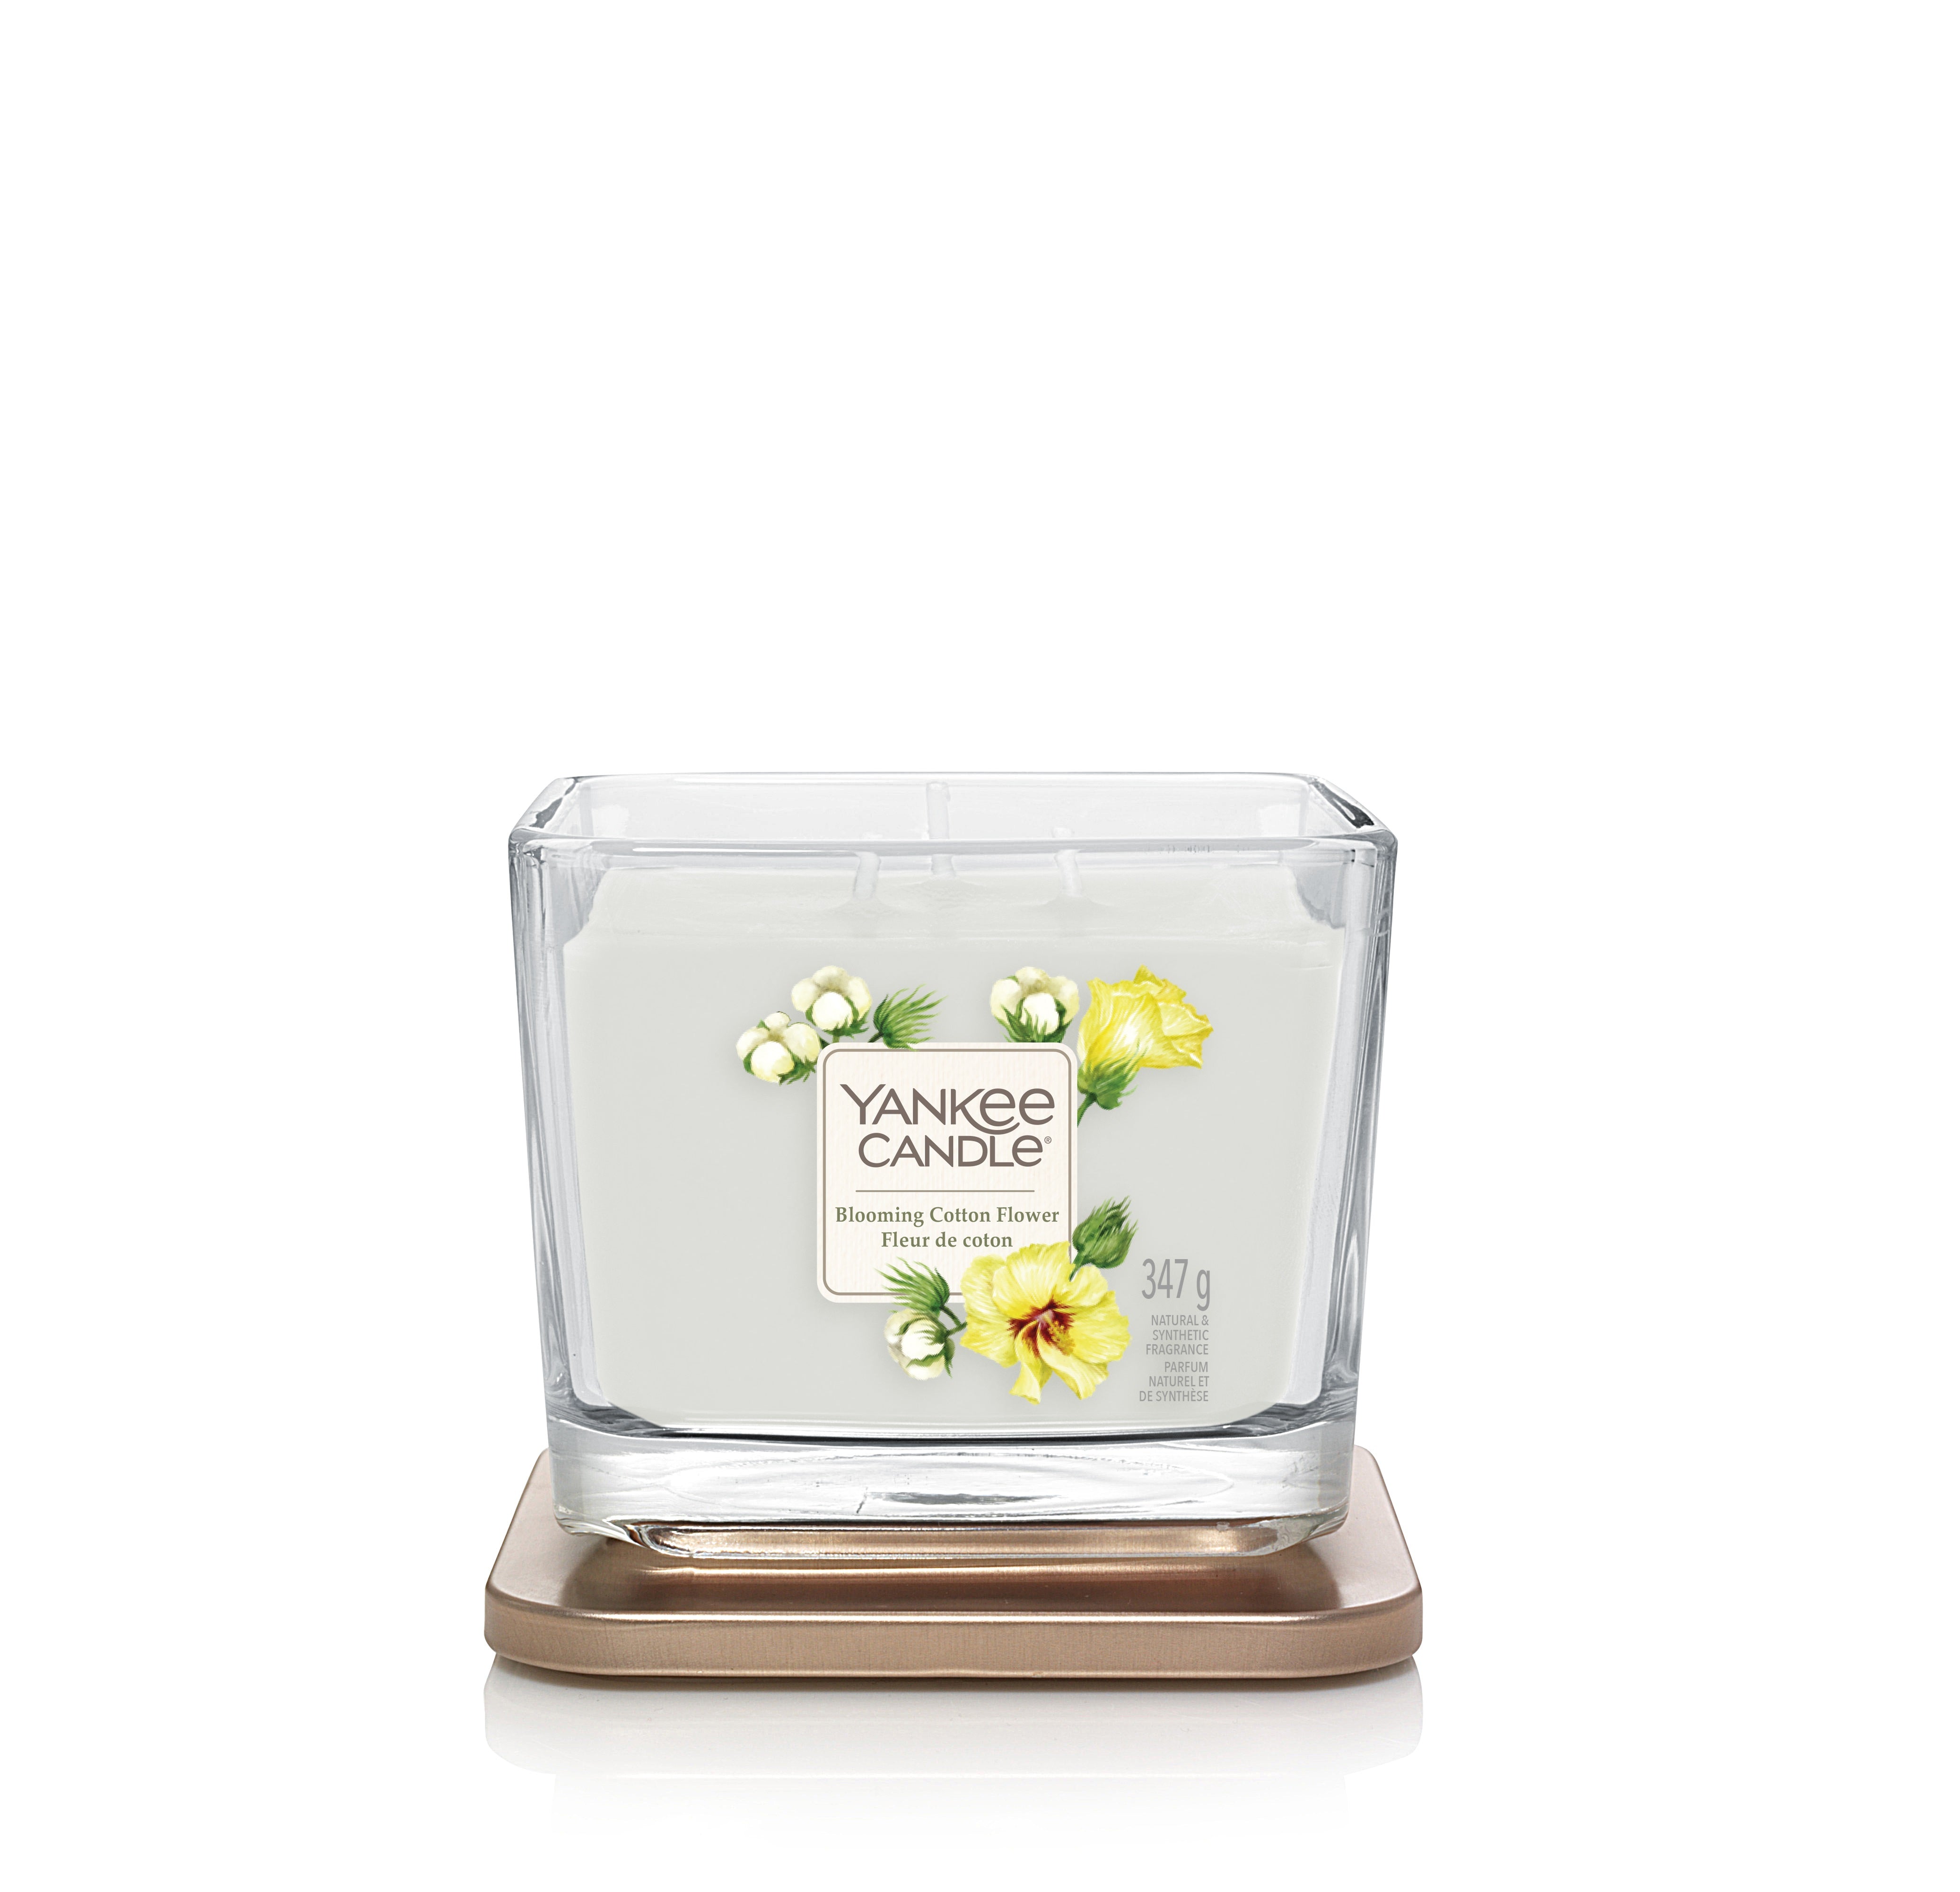 BLOOMING COTTON FLOWER -Yankee Candle- Candela Piccola